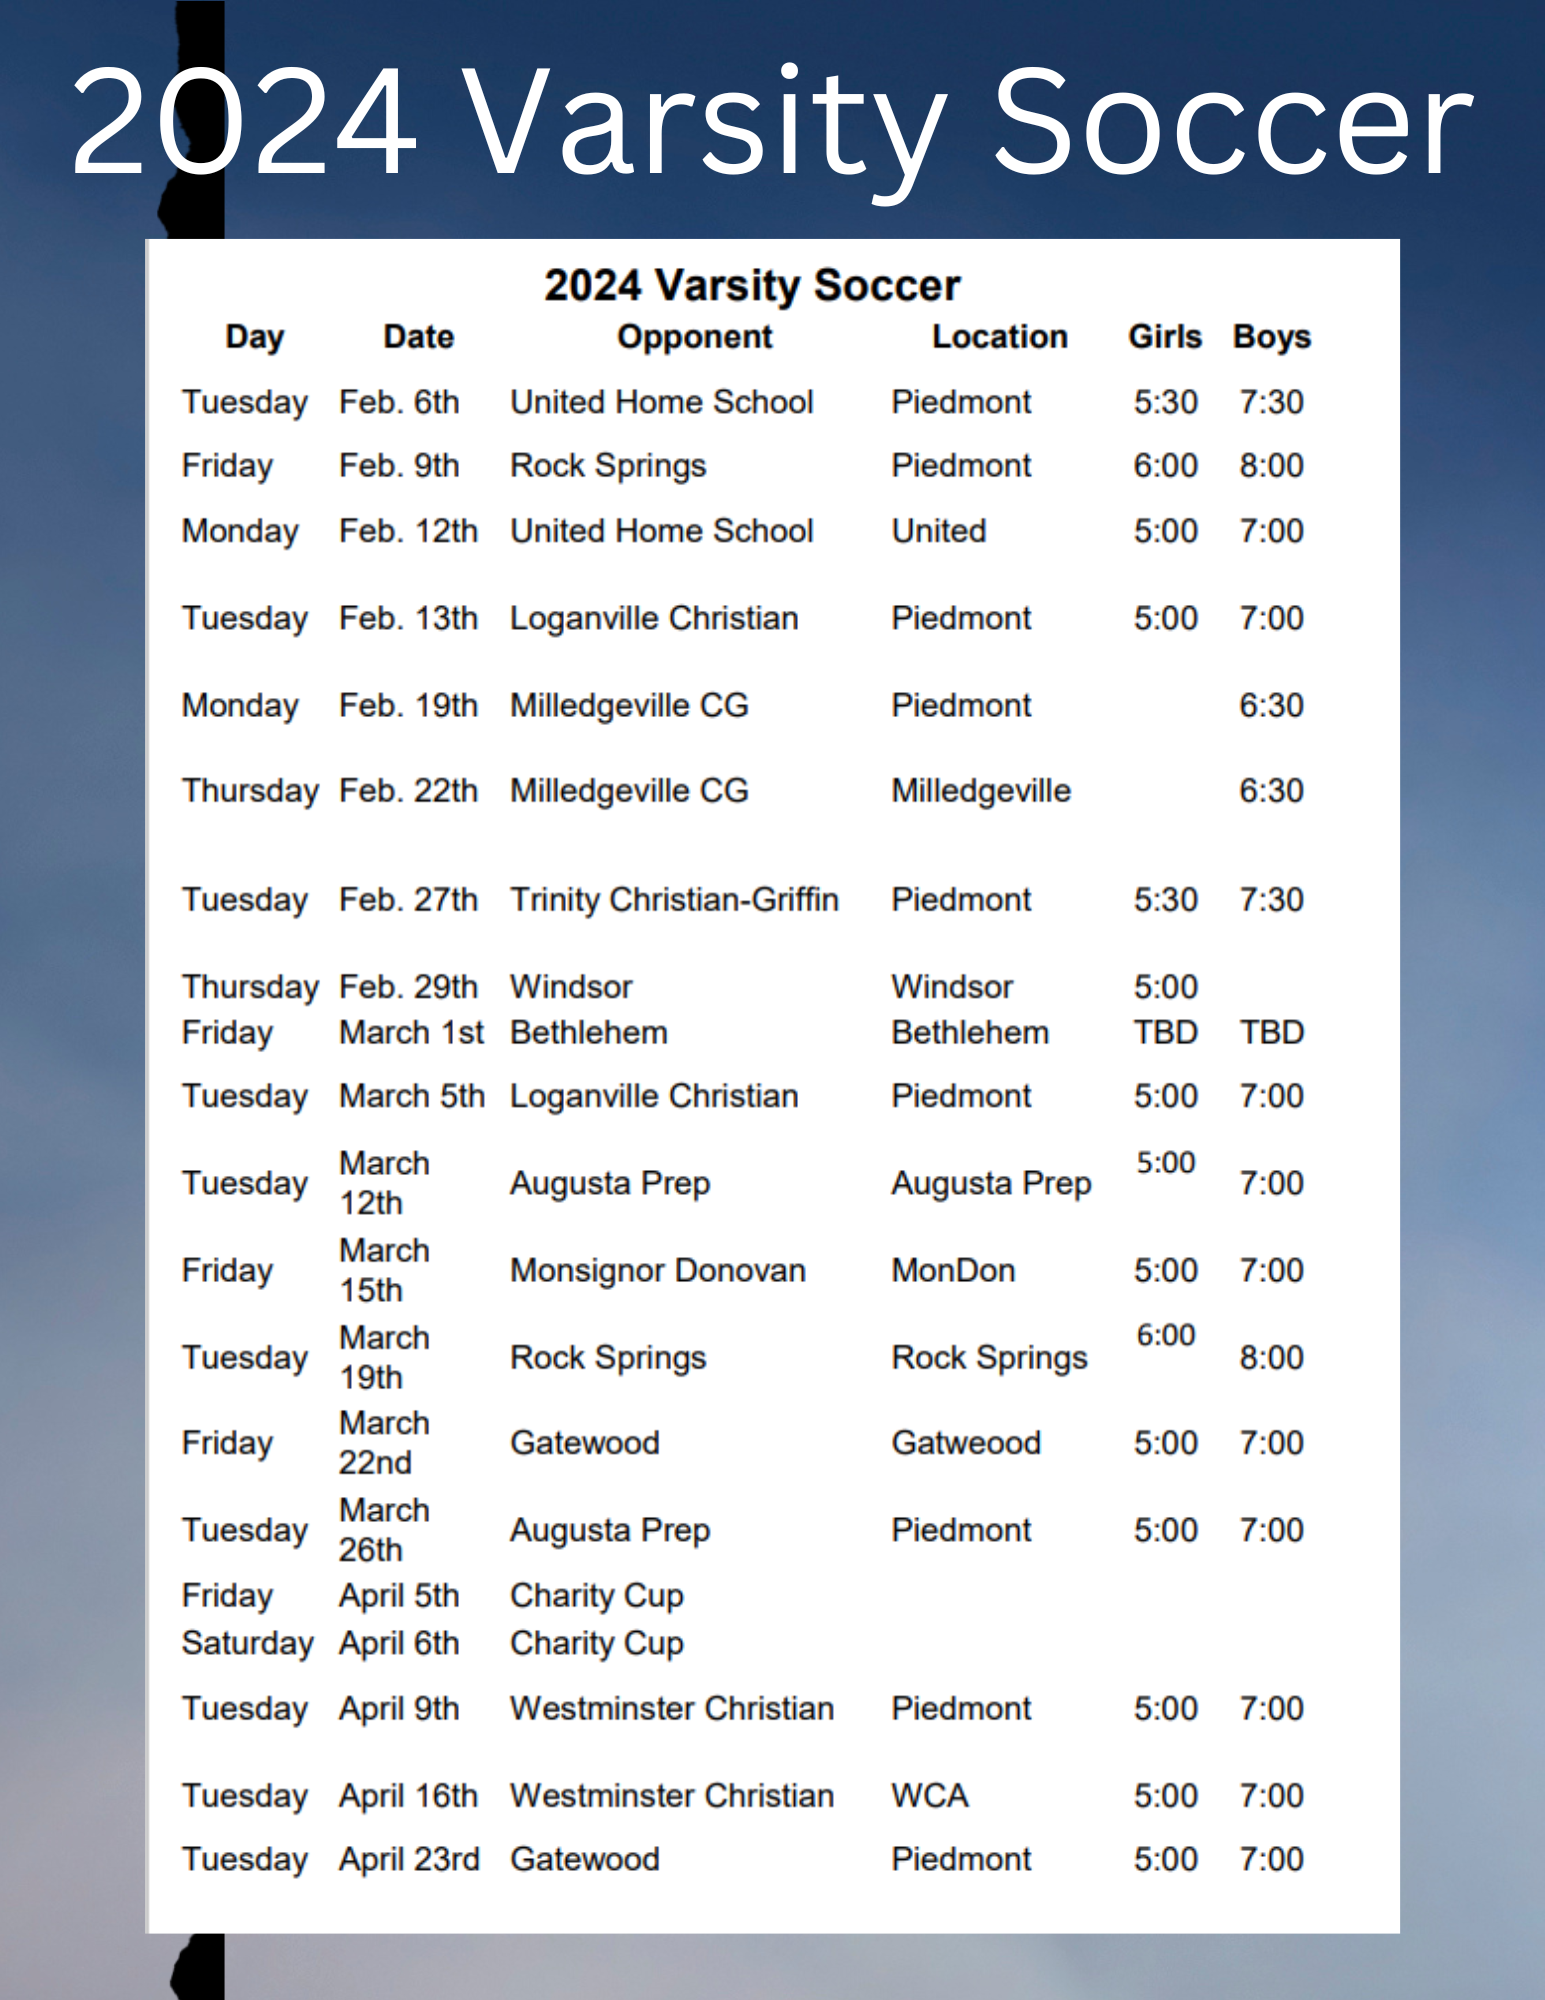 a soccer schedule for the 2024 varsity soccer season